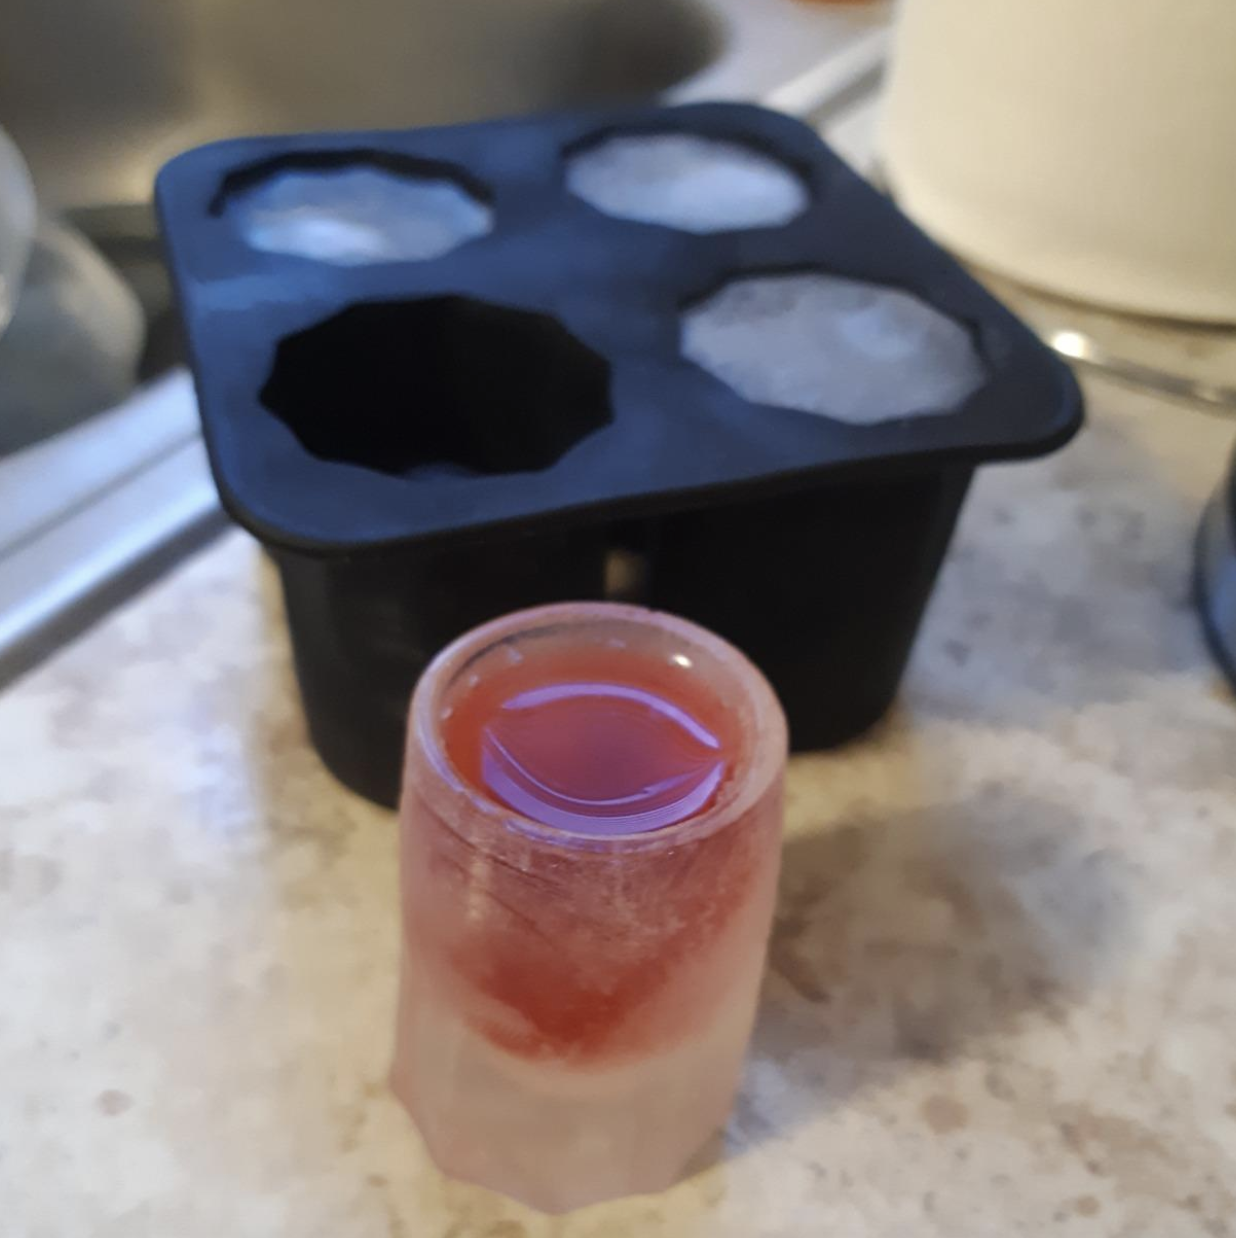 reviewer&#x27;s ice shot glass next to black silicone mold